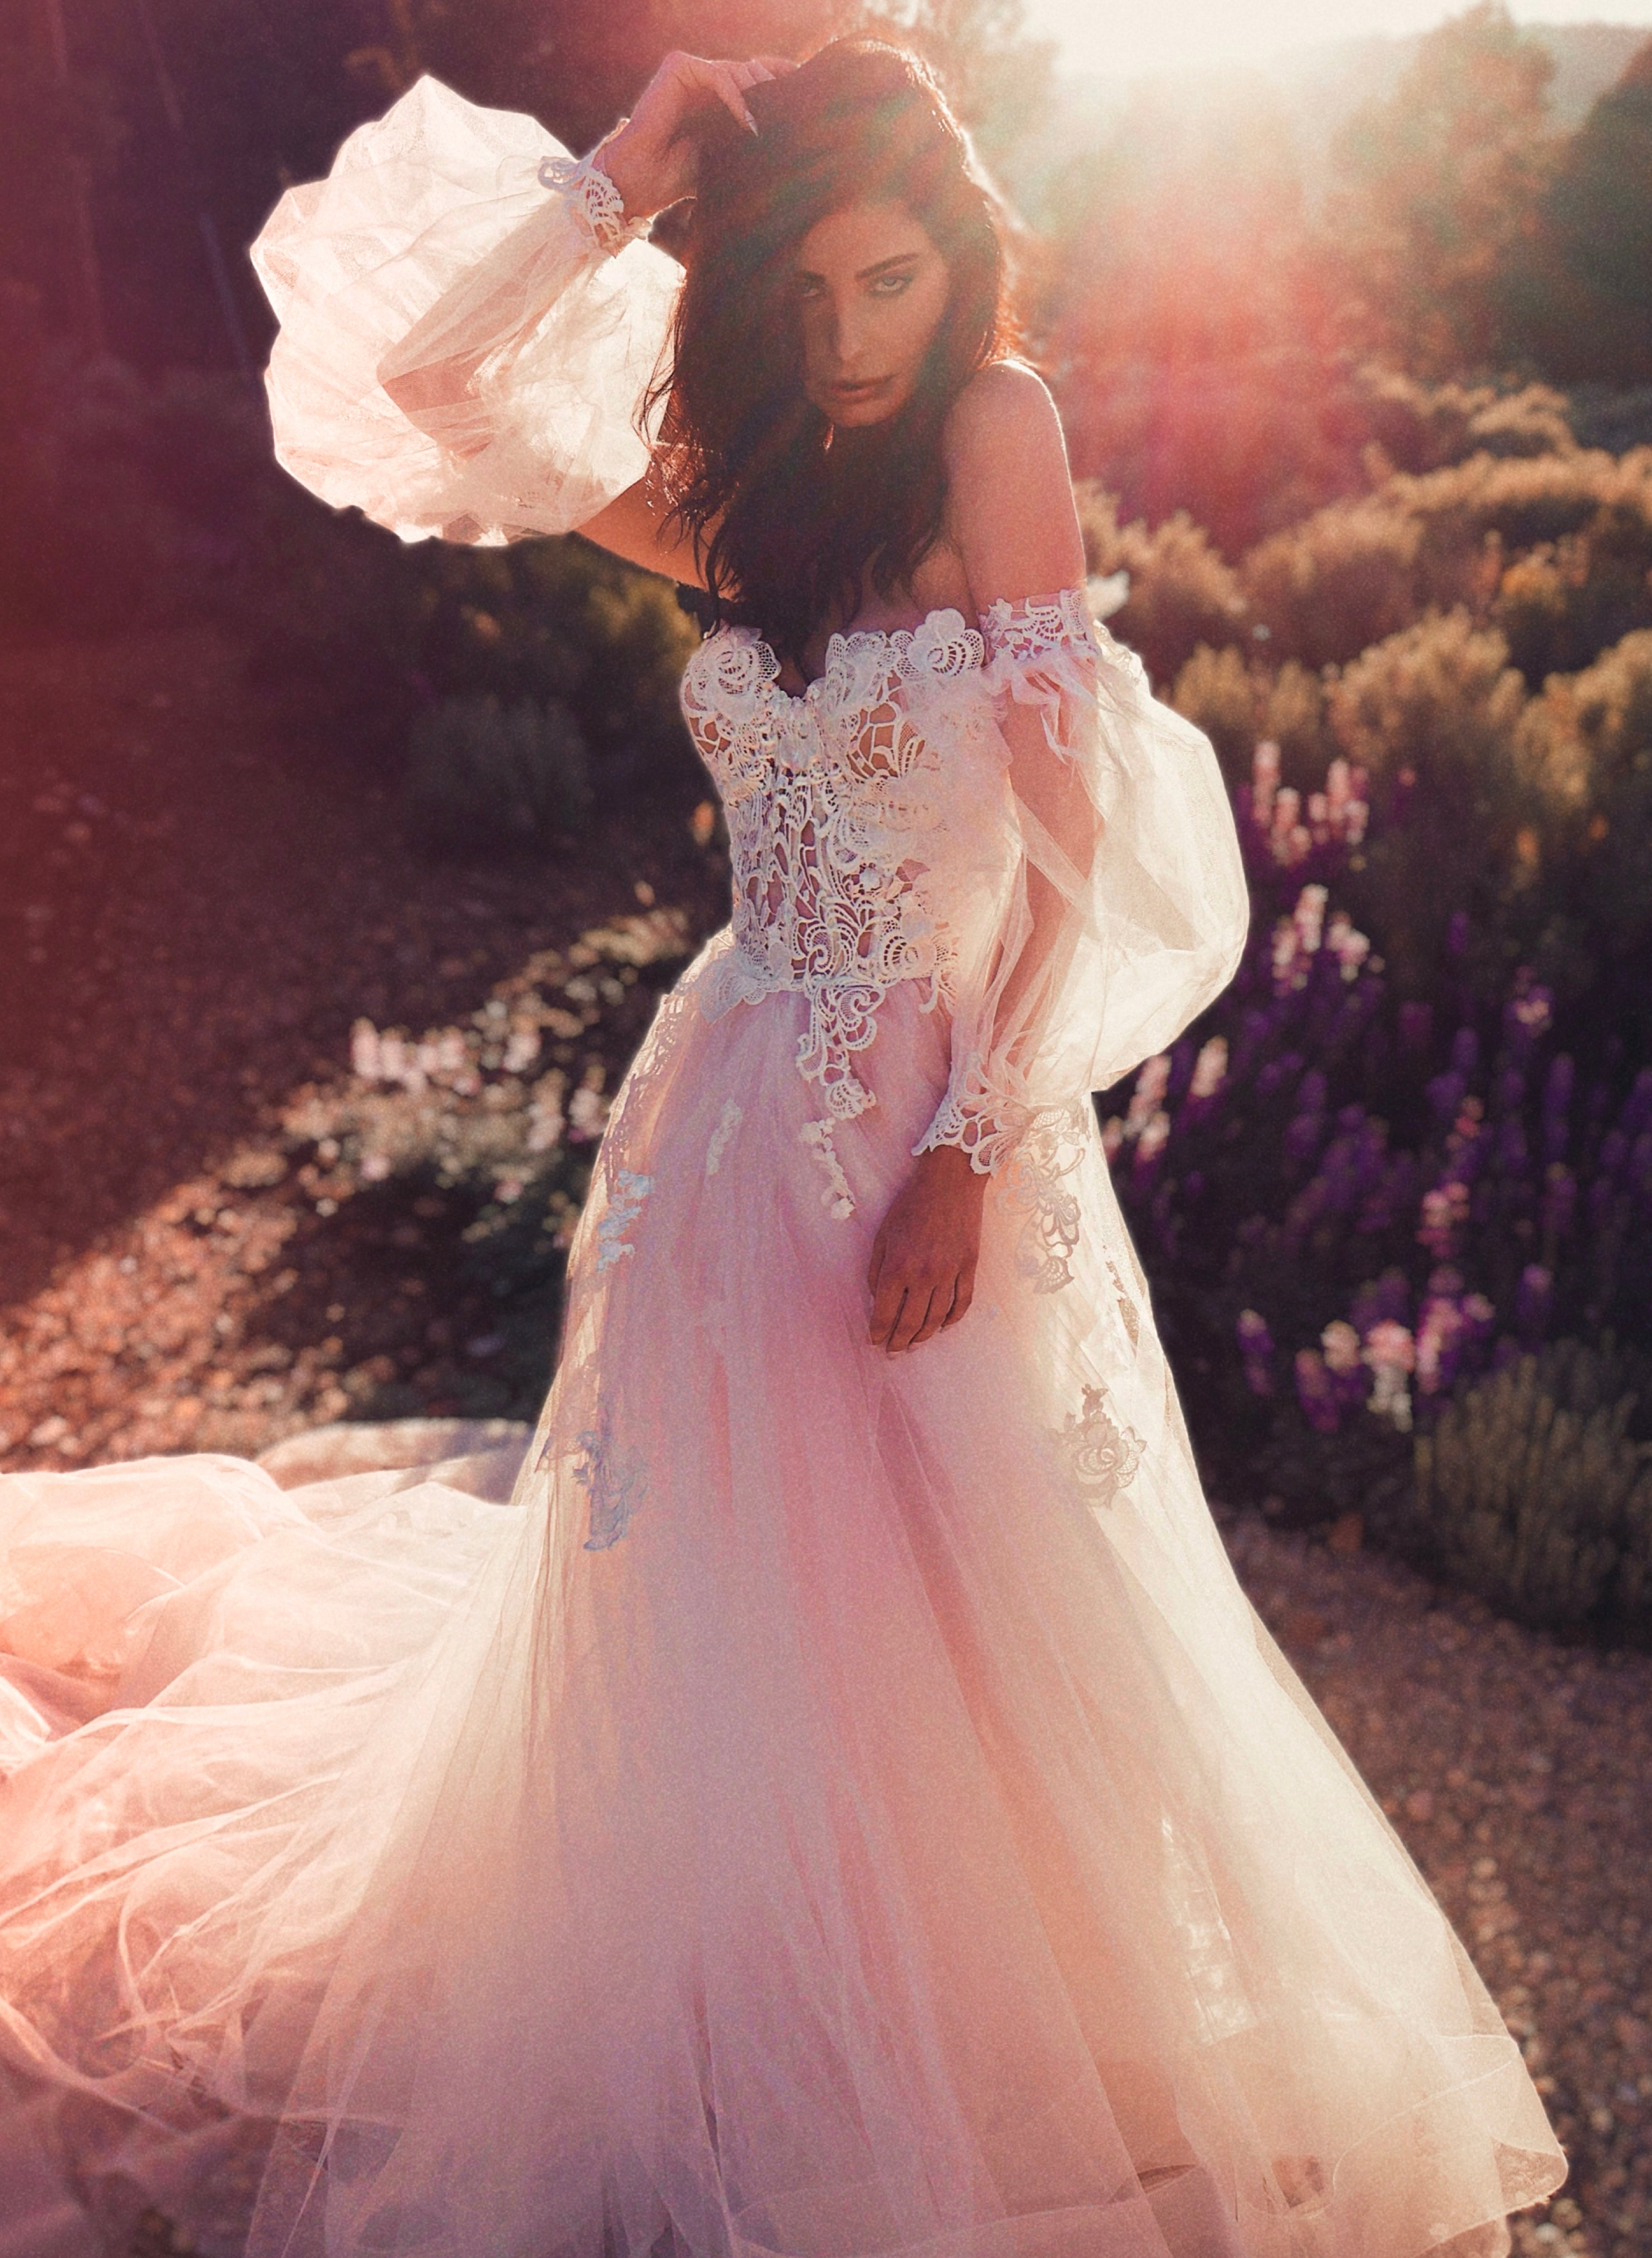 A model wears the Lauren Elaine Pastora guipure lace corset wedding gown with bishop sleeves